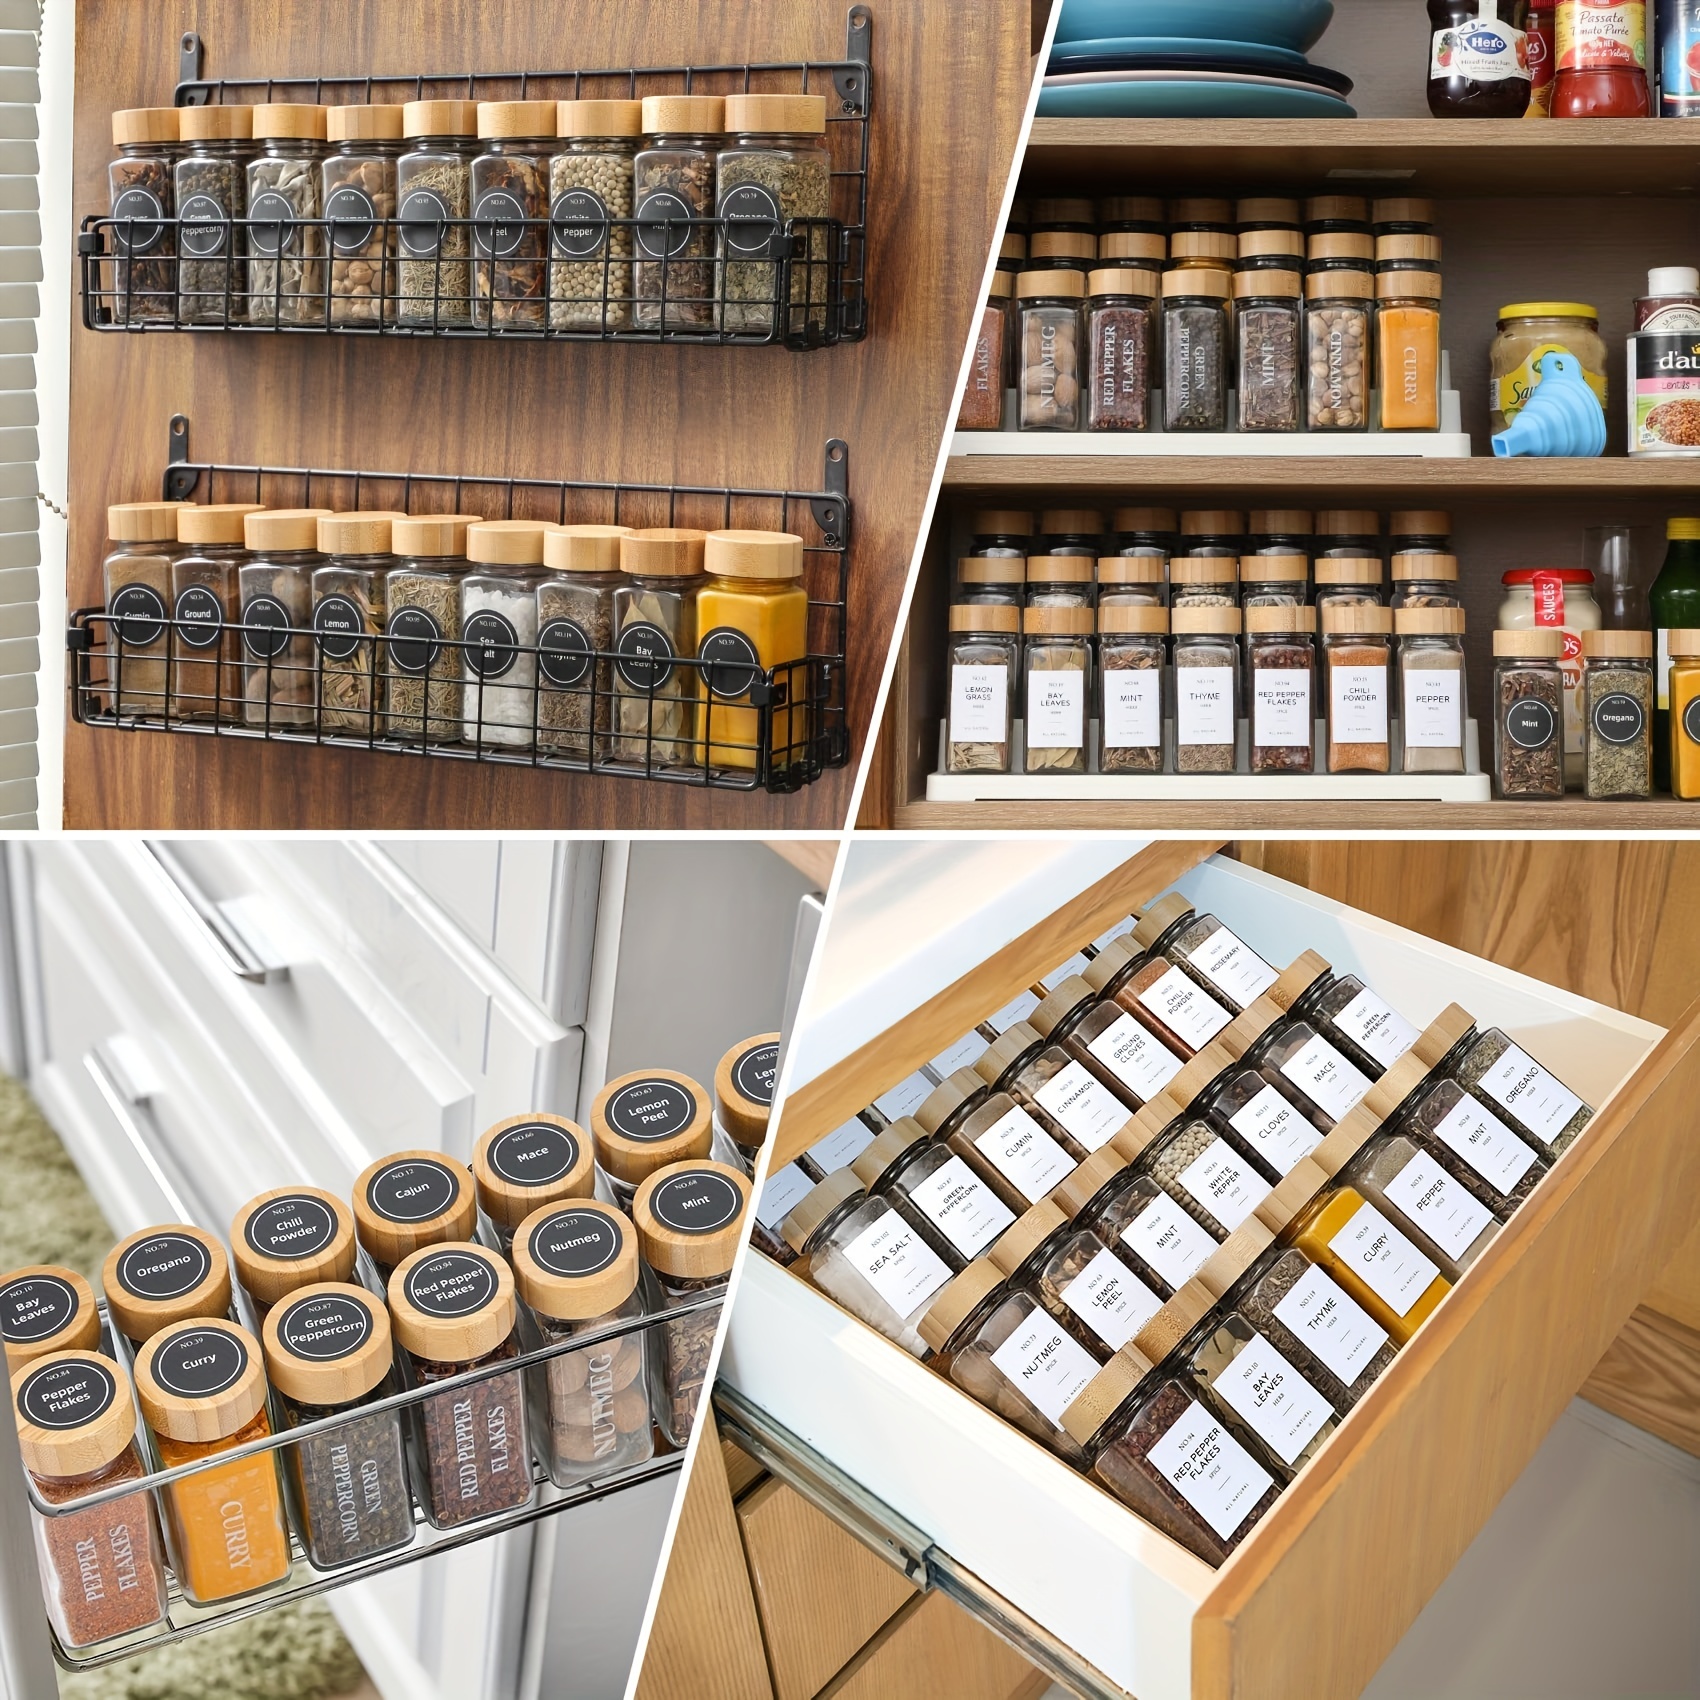 12pcs, Glass Spice Jars With Labels And Organizers, Spice Jars With Bamboo  Covers, Empty Glass Spice Jars With Labels, Seasoning Organizer Jar Labels